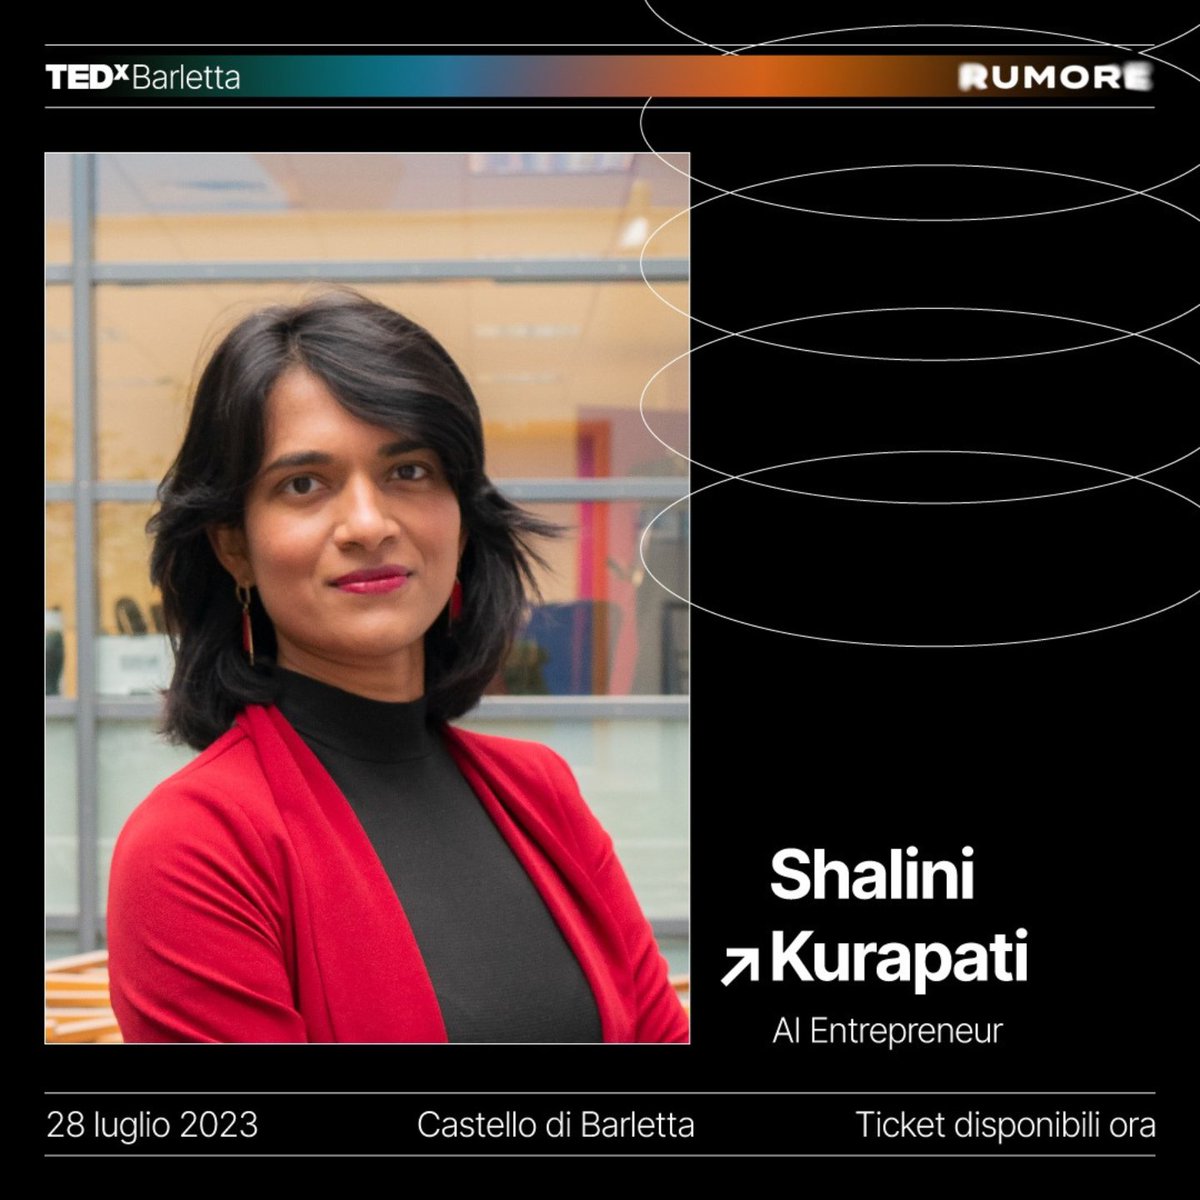 Mark your calendars for 28th July, our CEO @shalini_kr will be a speaker at @TEDxBarletta! 📍 Where: Castello di Barletta ⏰ When: 28th July from 4.30 PM To know more about the lineup of speakers and to secure your tickets, visit: bit.ly/tedxbarletta23 #TEDx #TEDxBarletta